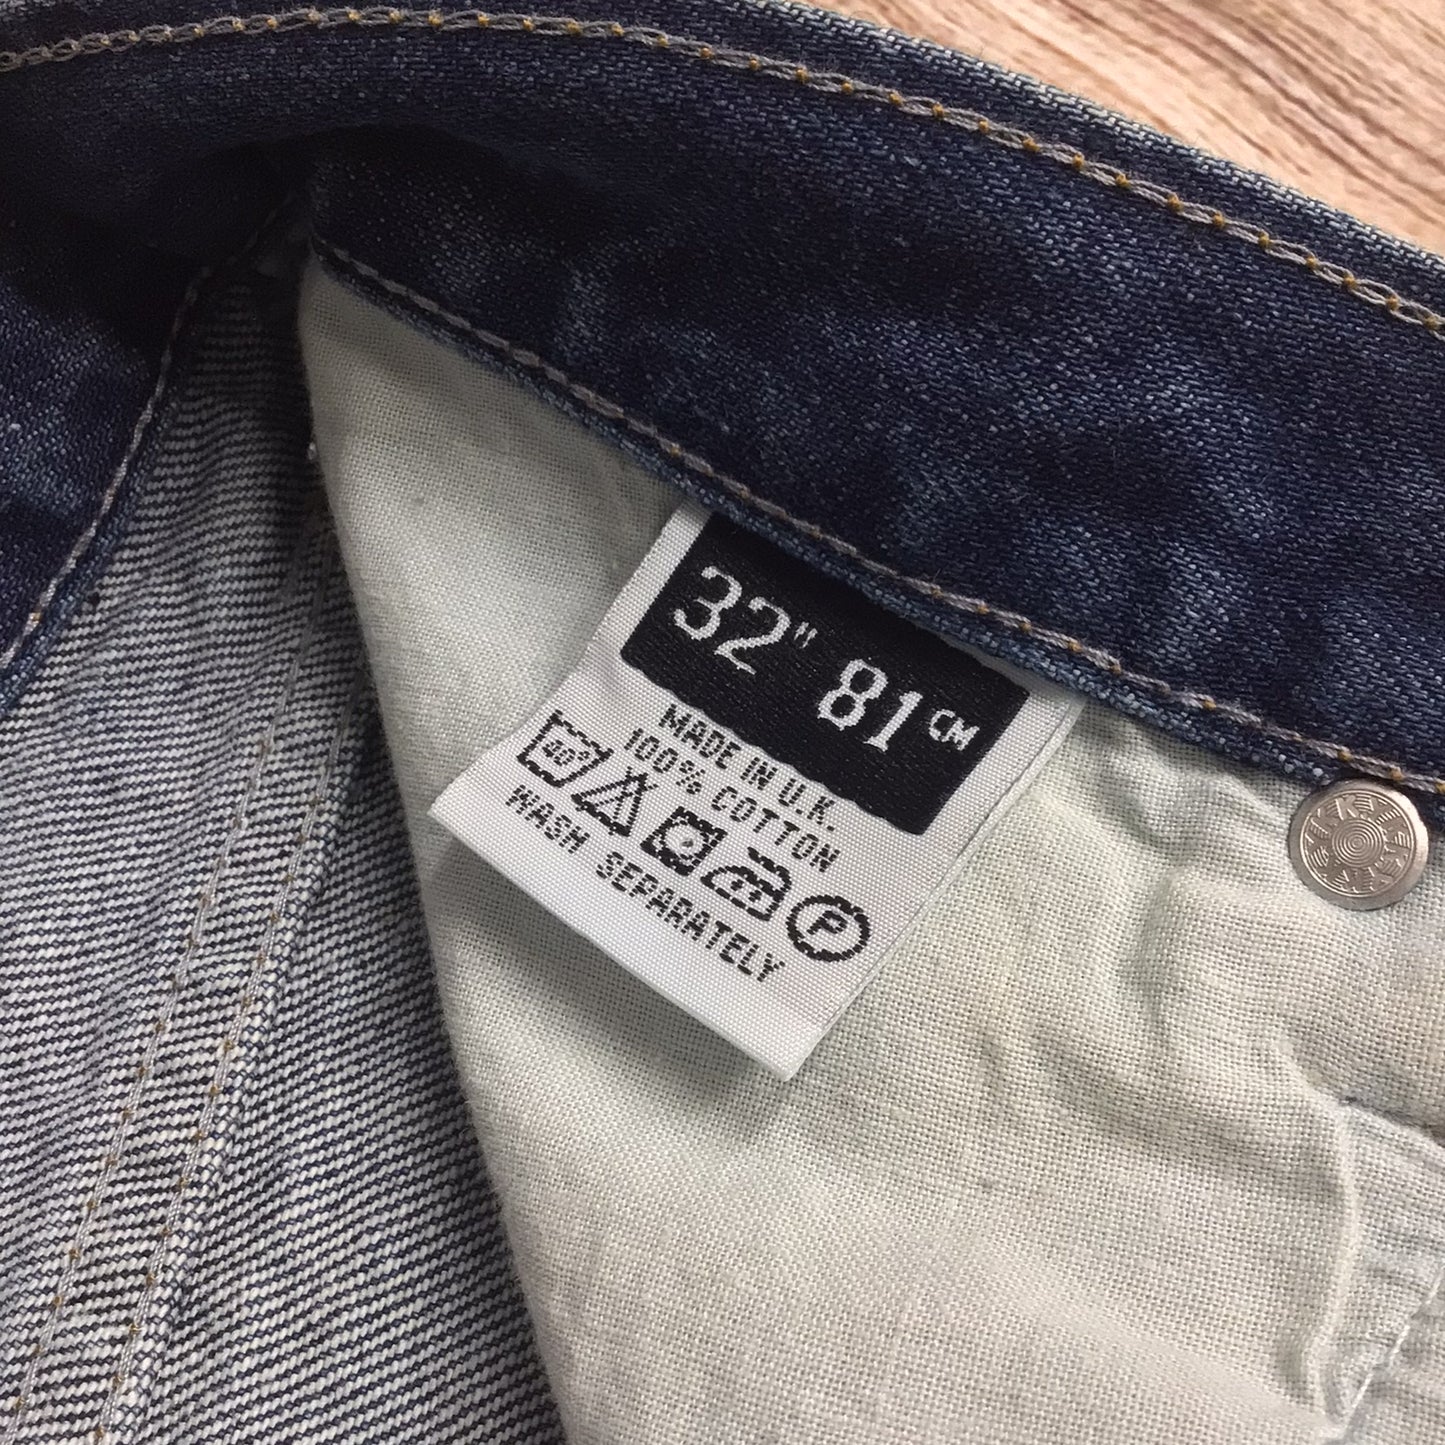 Armani Blue Jeans 100% Cotton Size W32" (turned up)